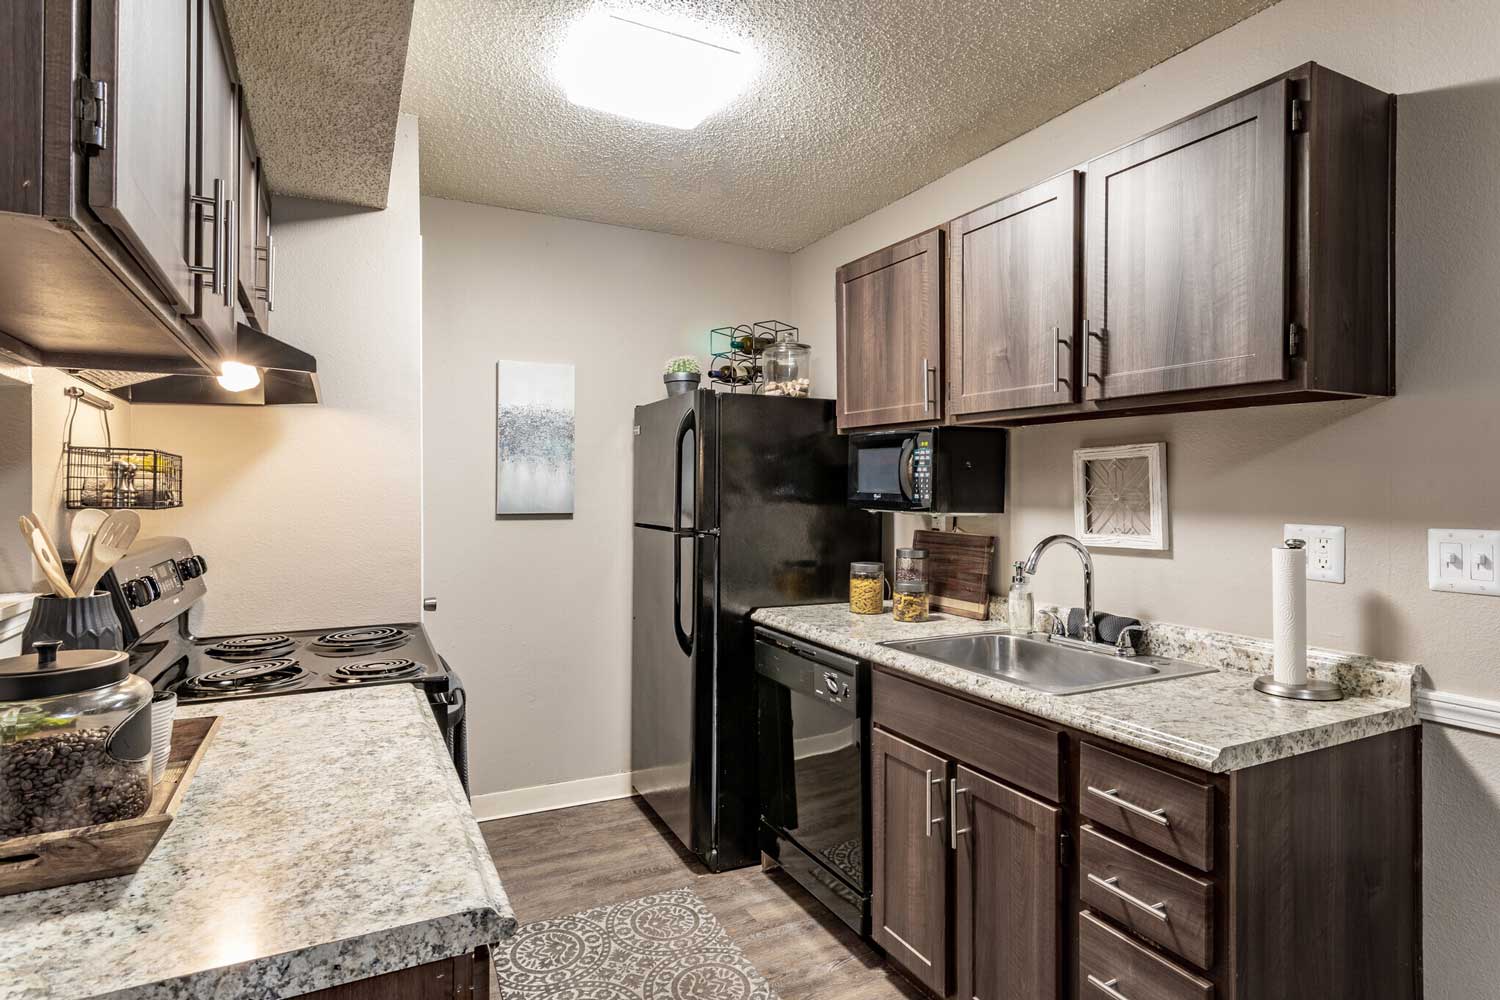 Well-Equipped Kitchen at Rustic Woods Apartments in Tulsa, Oklahoma